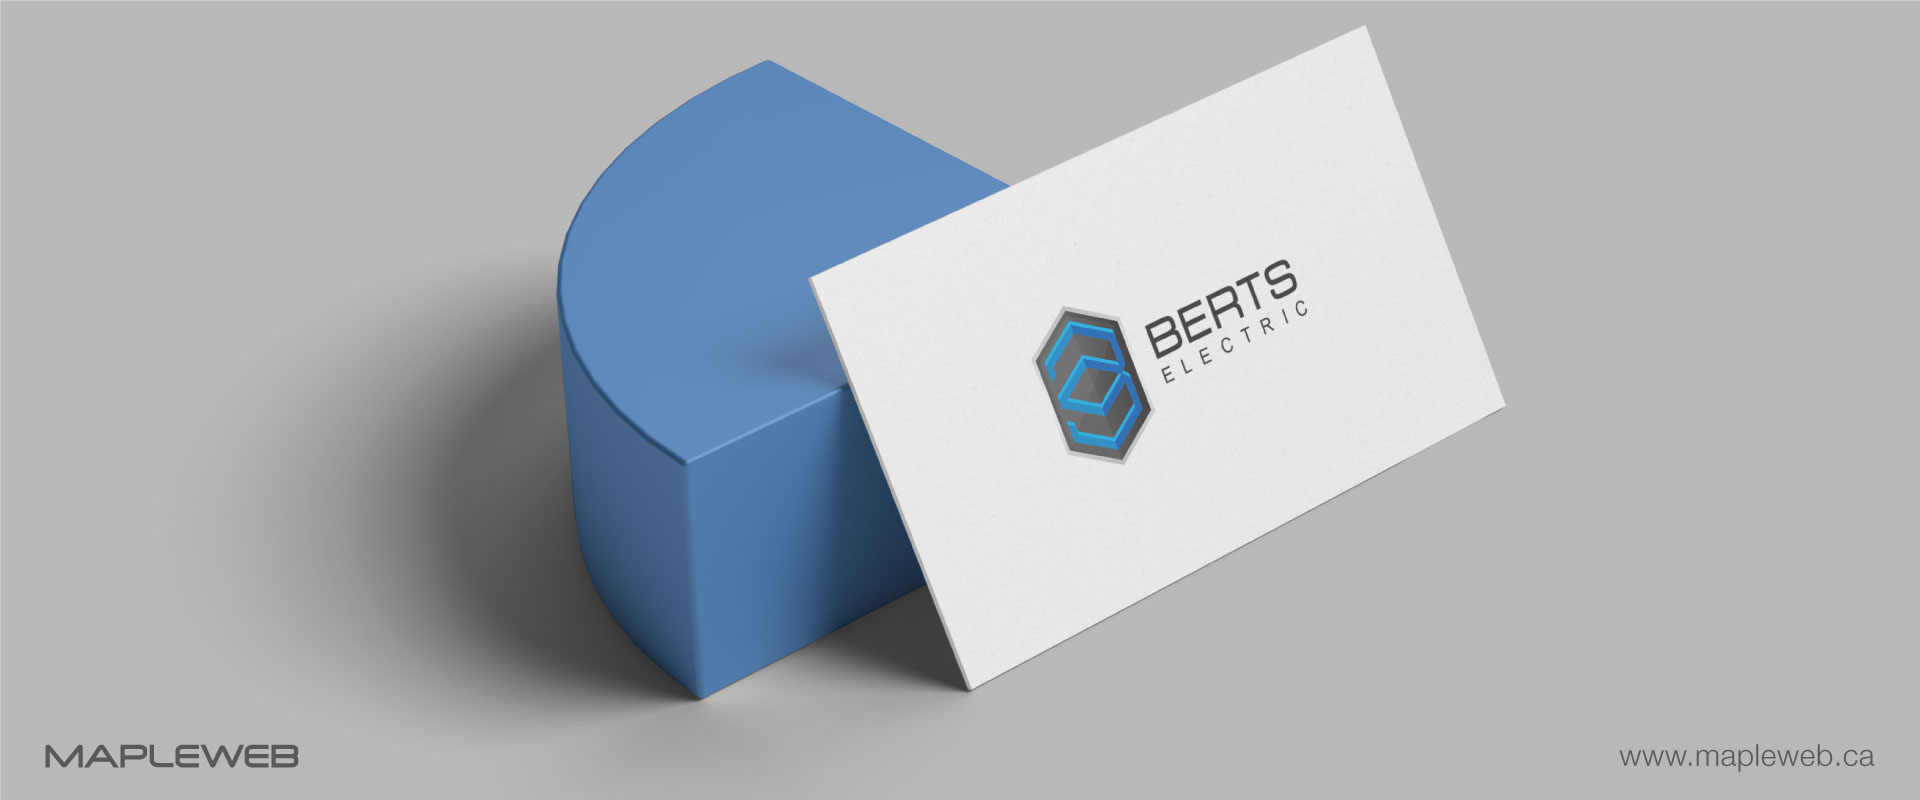 berts-electric-brand-logo-design-by-mapleweb-vancouver-canada-business-card-mock